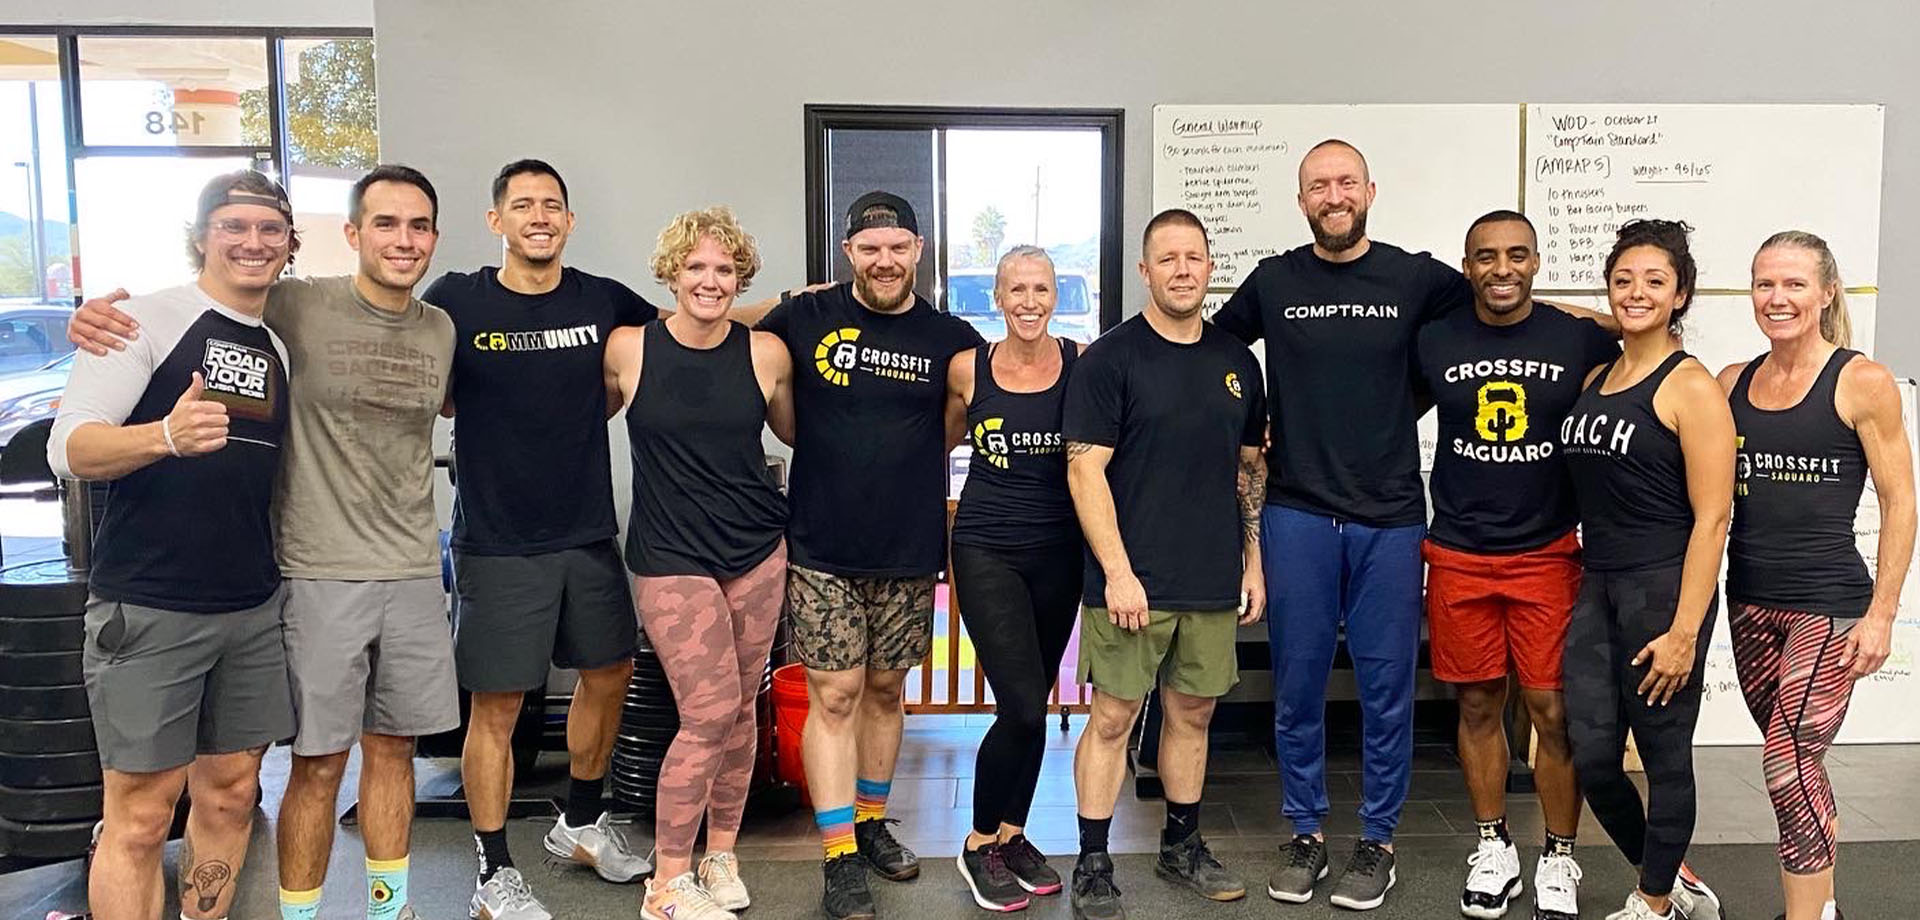 Why CrossFit Saguaro Is Ranked One of The Best Gyms In Tucson